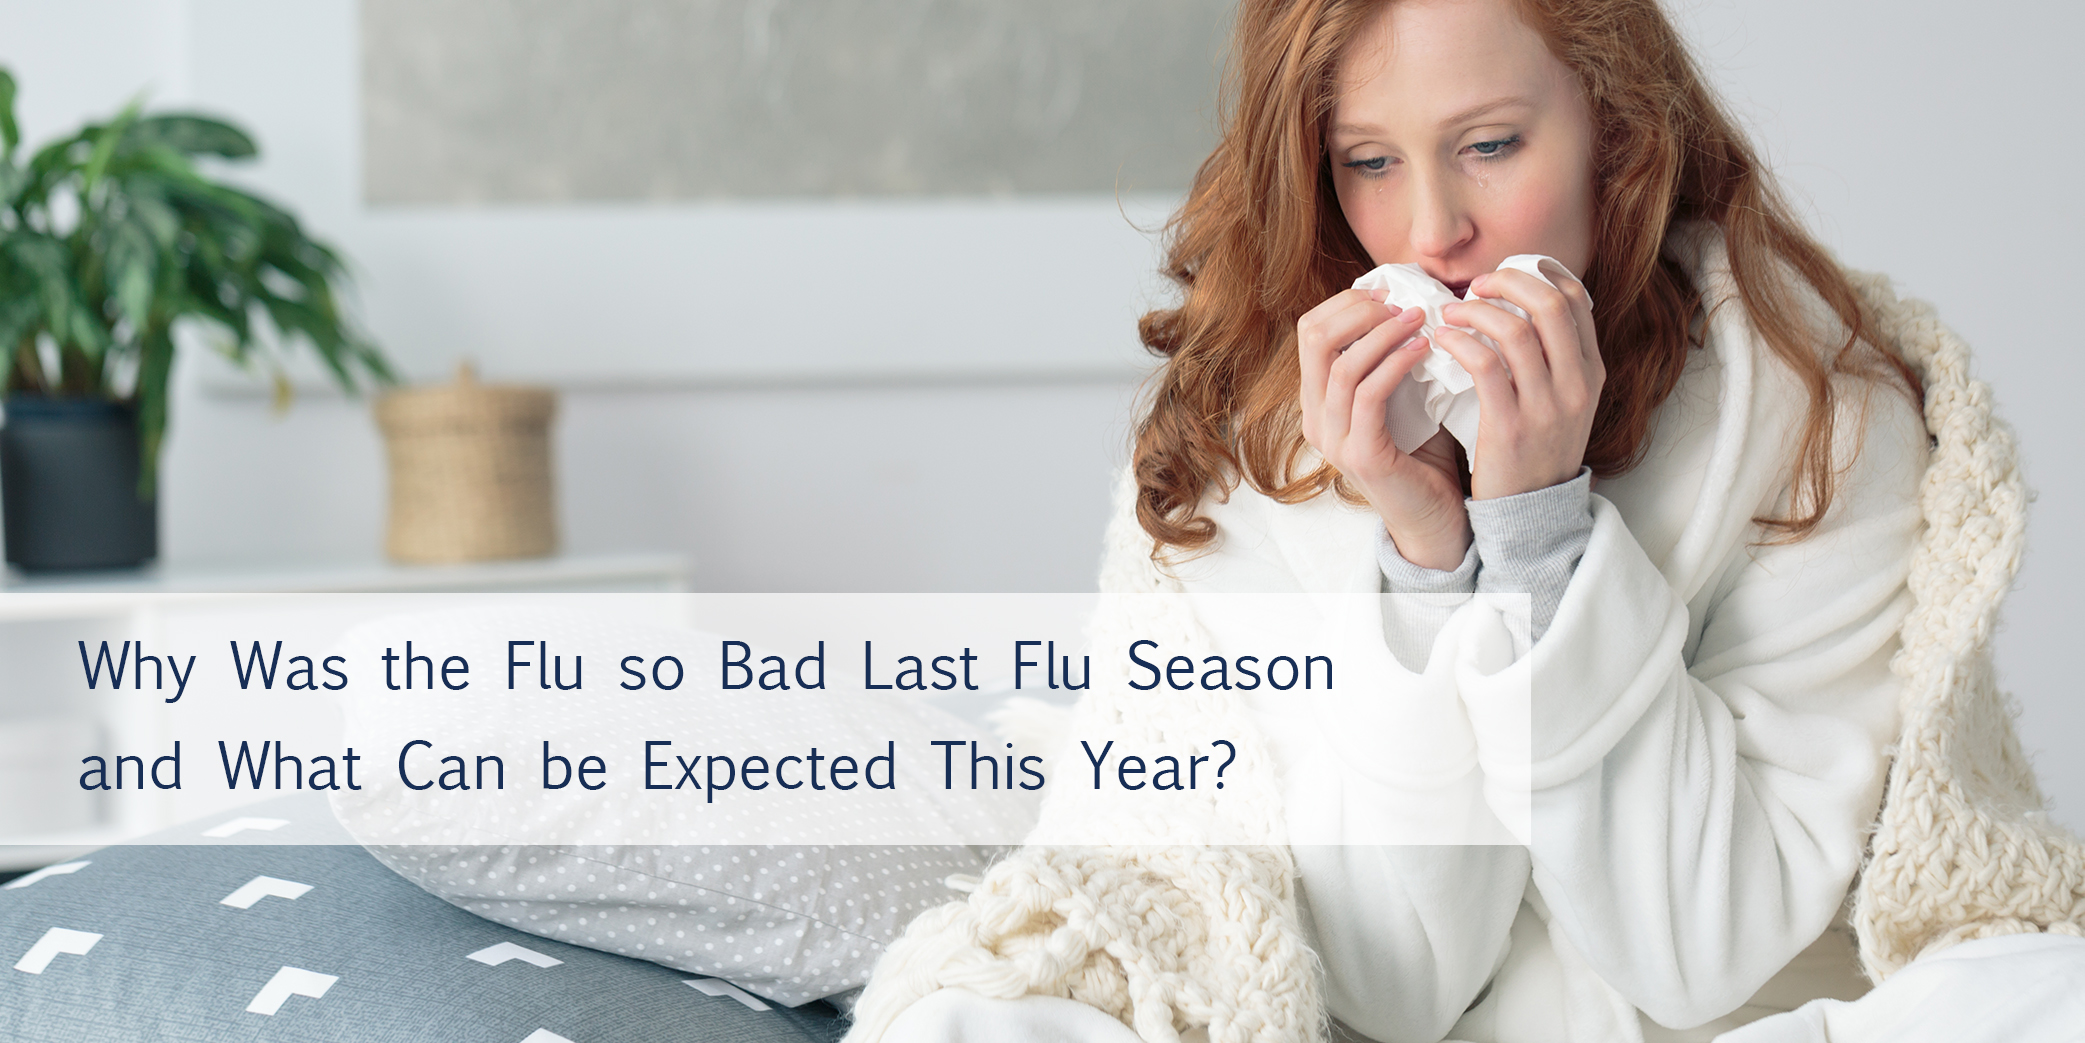 Why was the last flu season so bad and what can be expected this year?